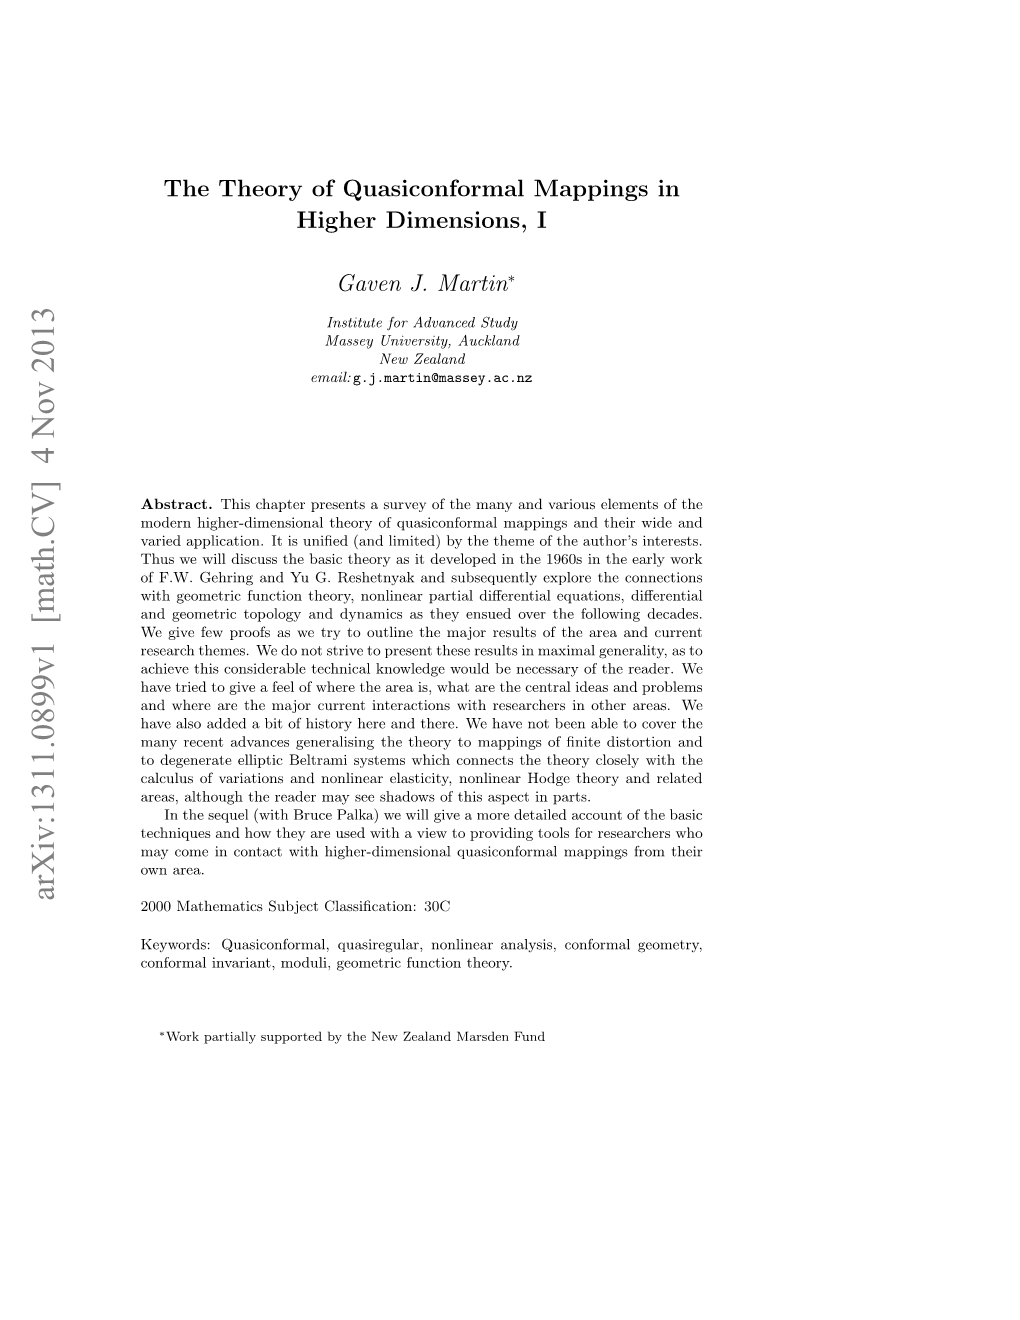 The Theory of Quasiconformal Mappings in Higher Dimensions, I 3